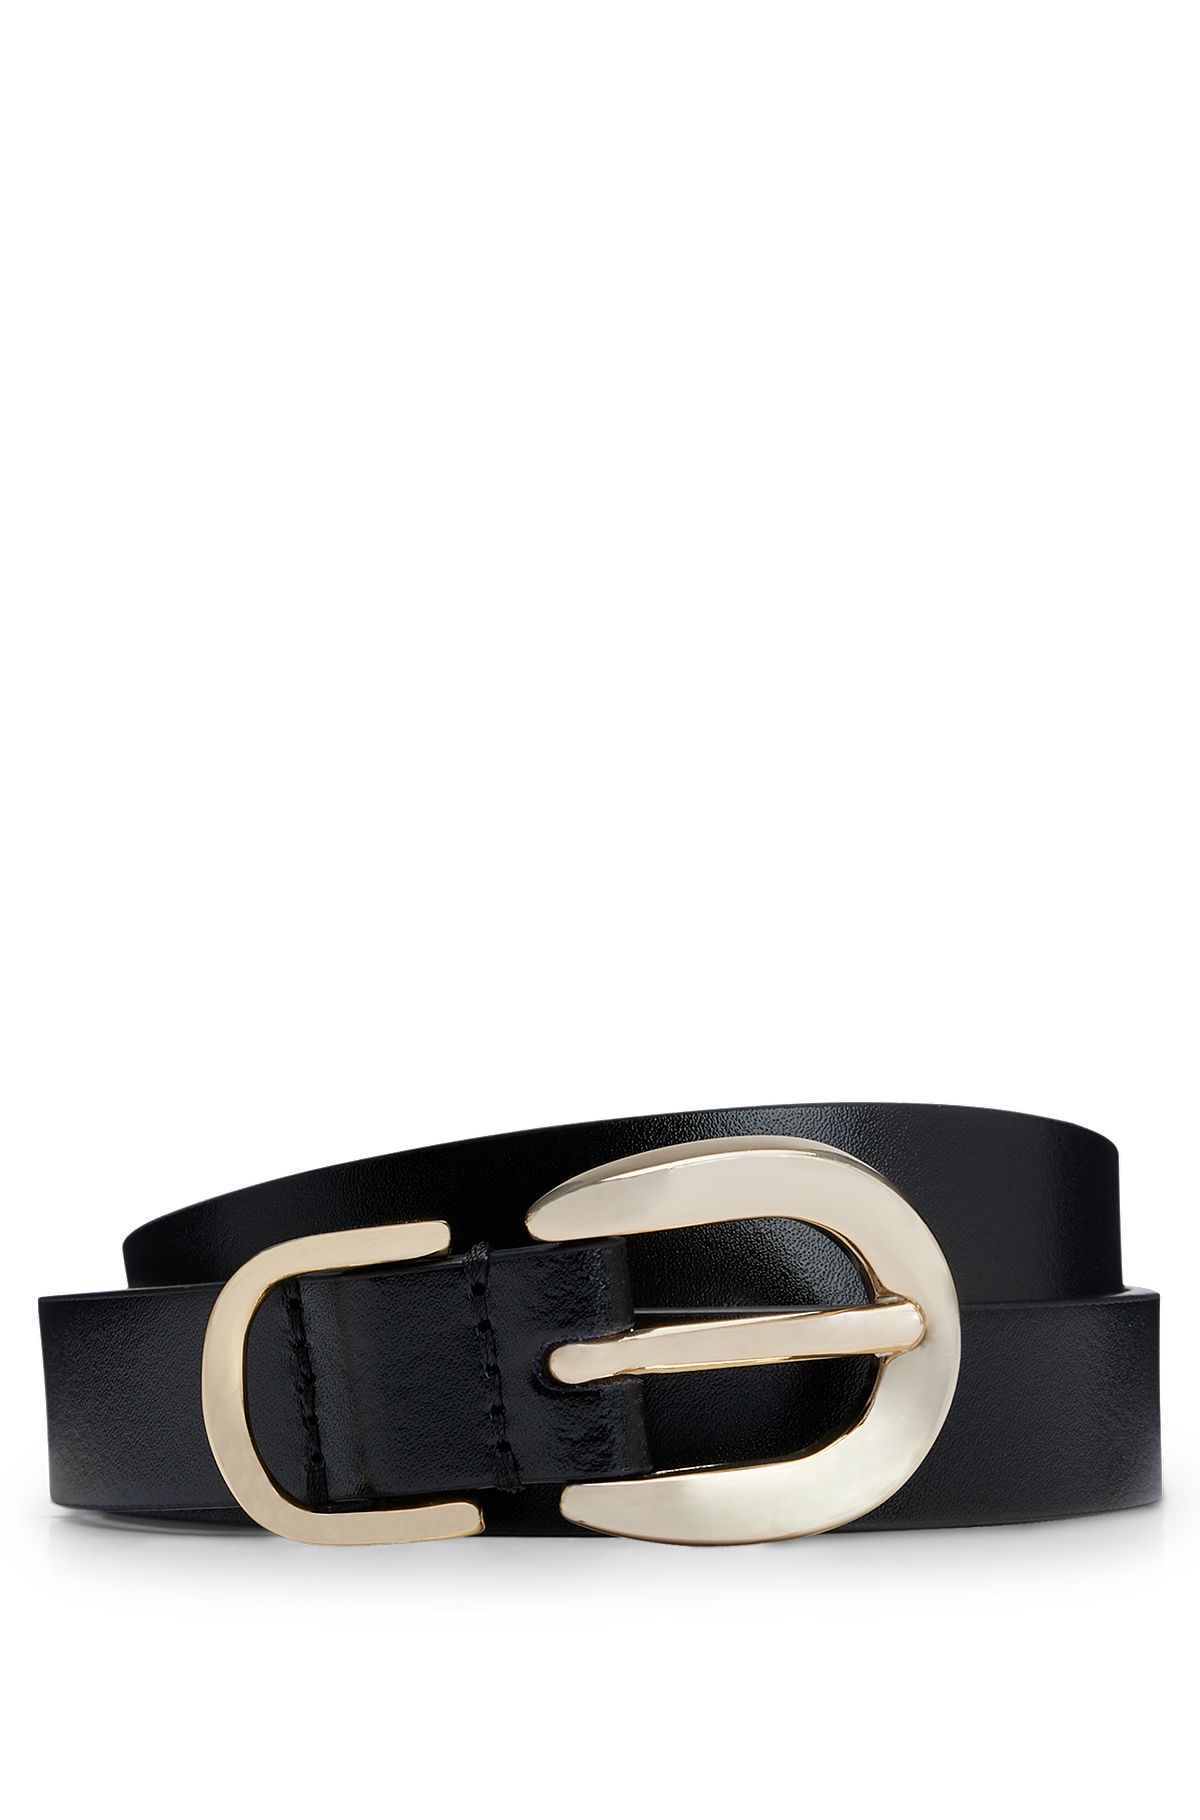 Italian-leather belt with ice-gold-tone buckle, Black